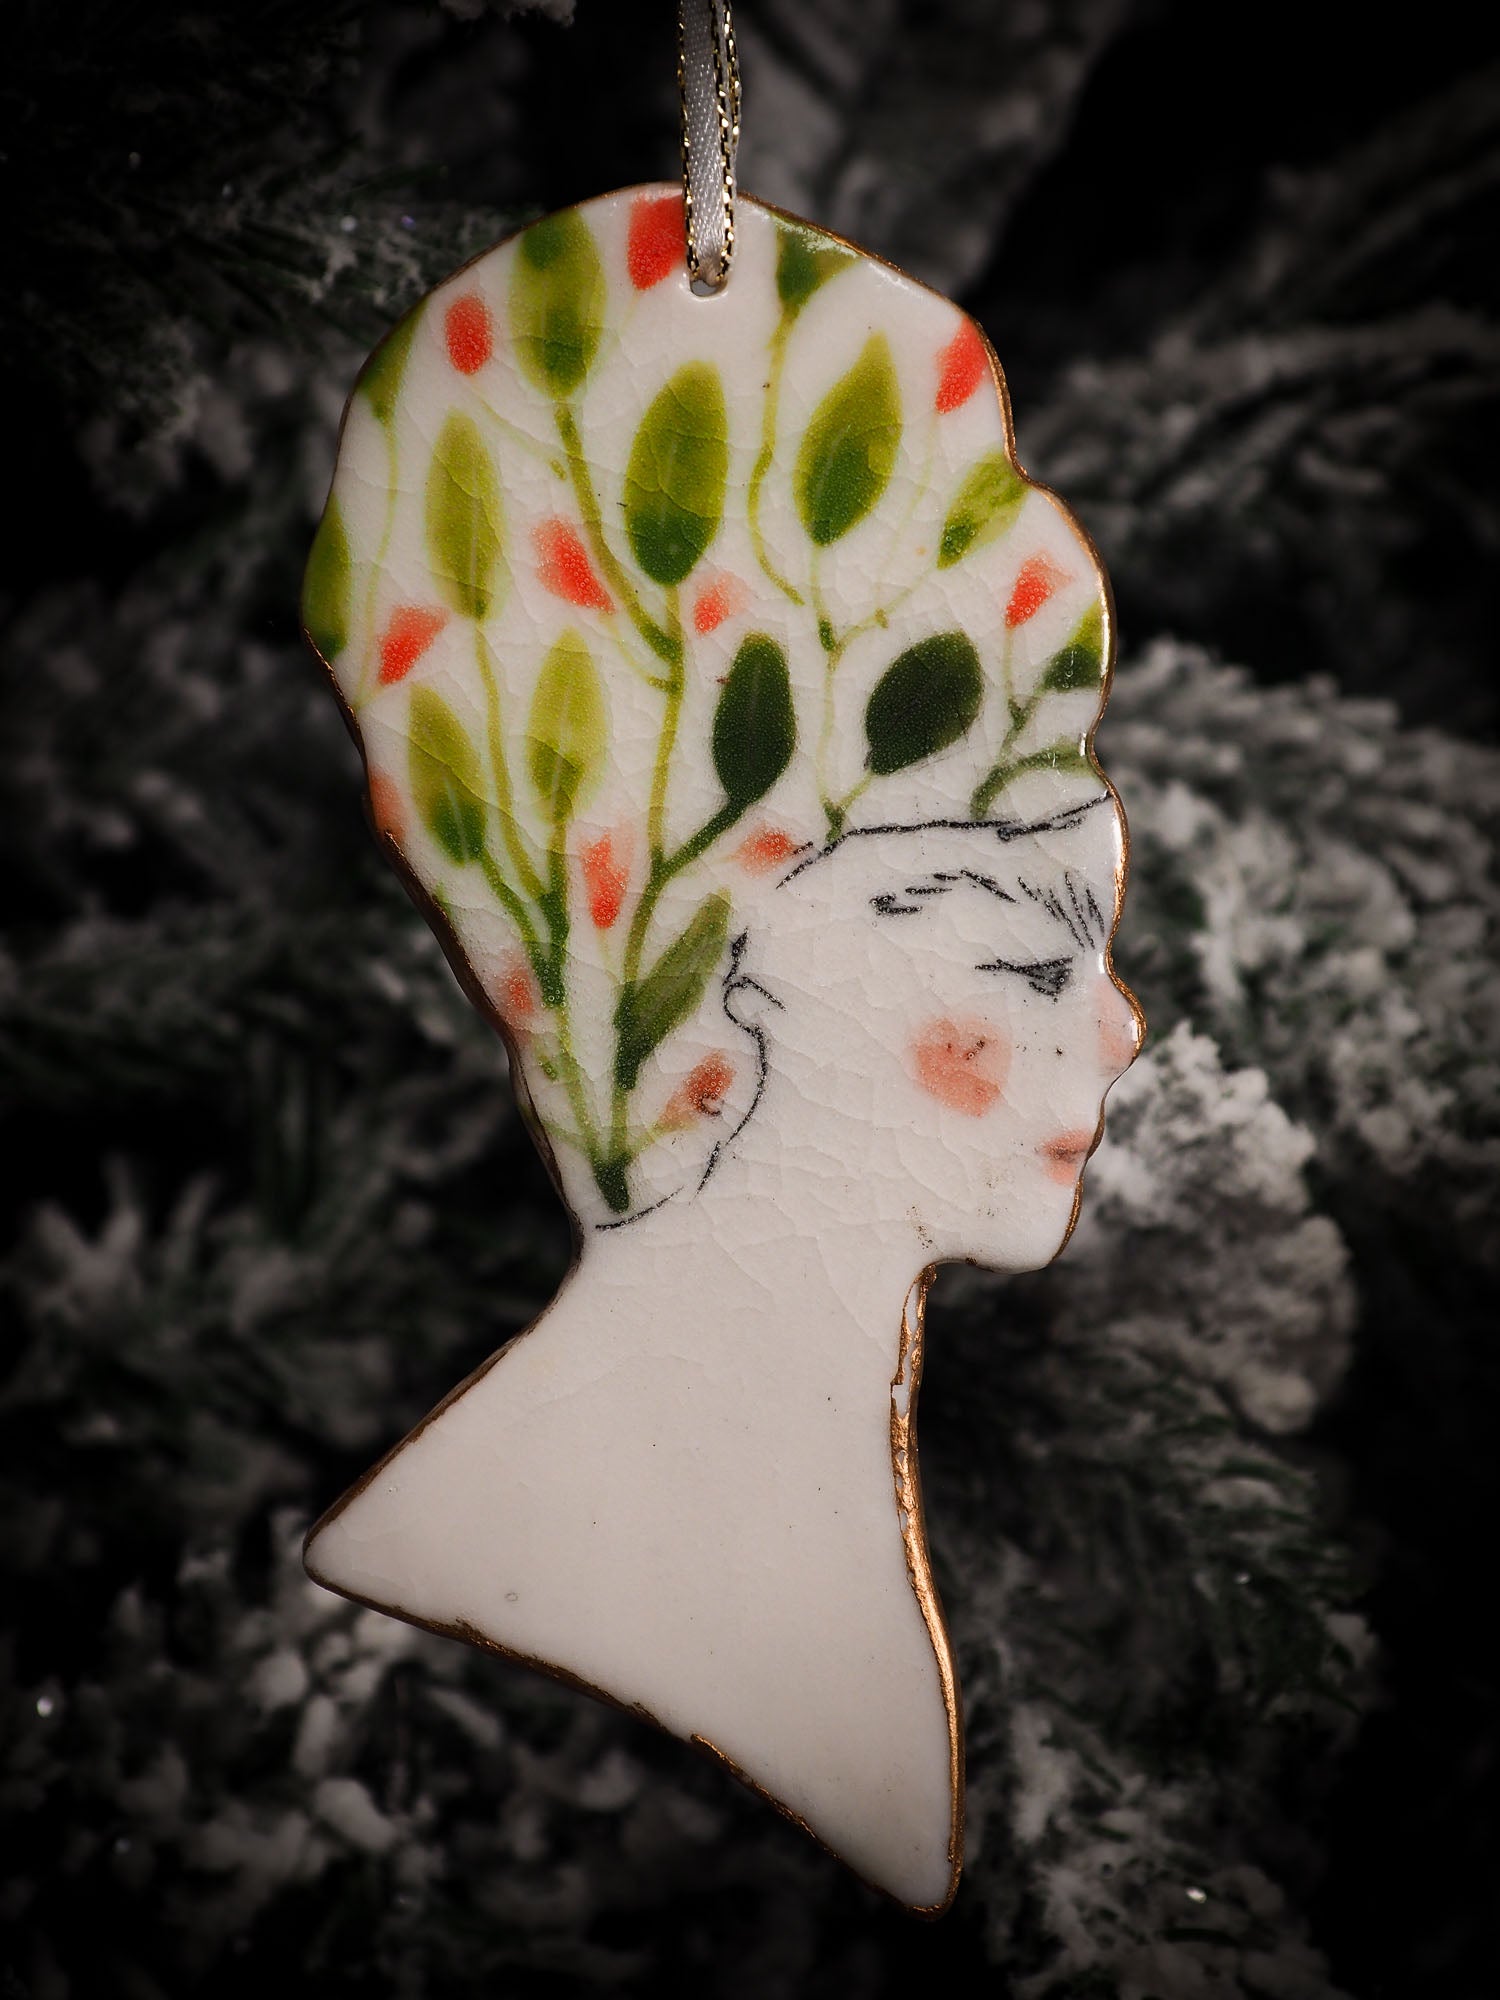 An original Christmas Holiday tree round glazed ceramic hanging ornament handmade by Idania Salcido, the artist behind Danita Art. Glazed carved sgraffito stoneware, hand painted and decorated, it is illustrated by hand with flowers, hearts, leaves, nature patterns and the face of Frida Kahlo.